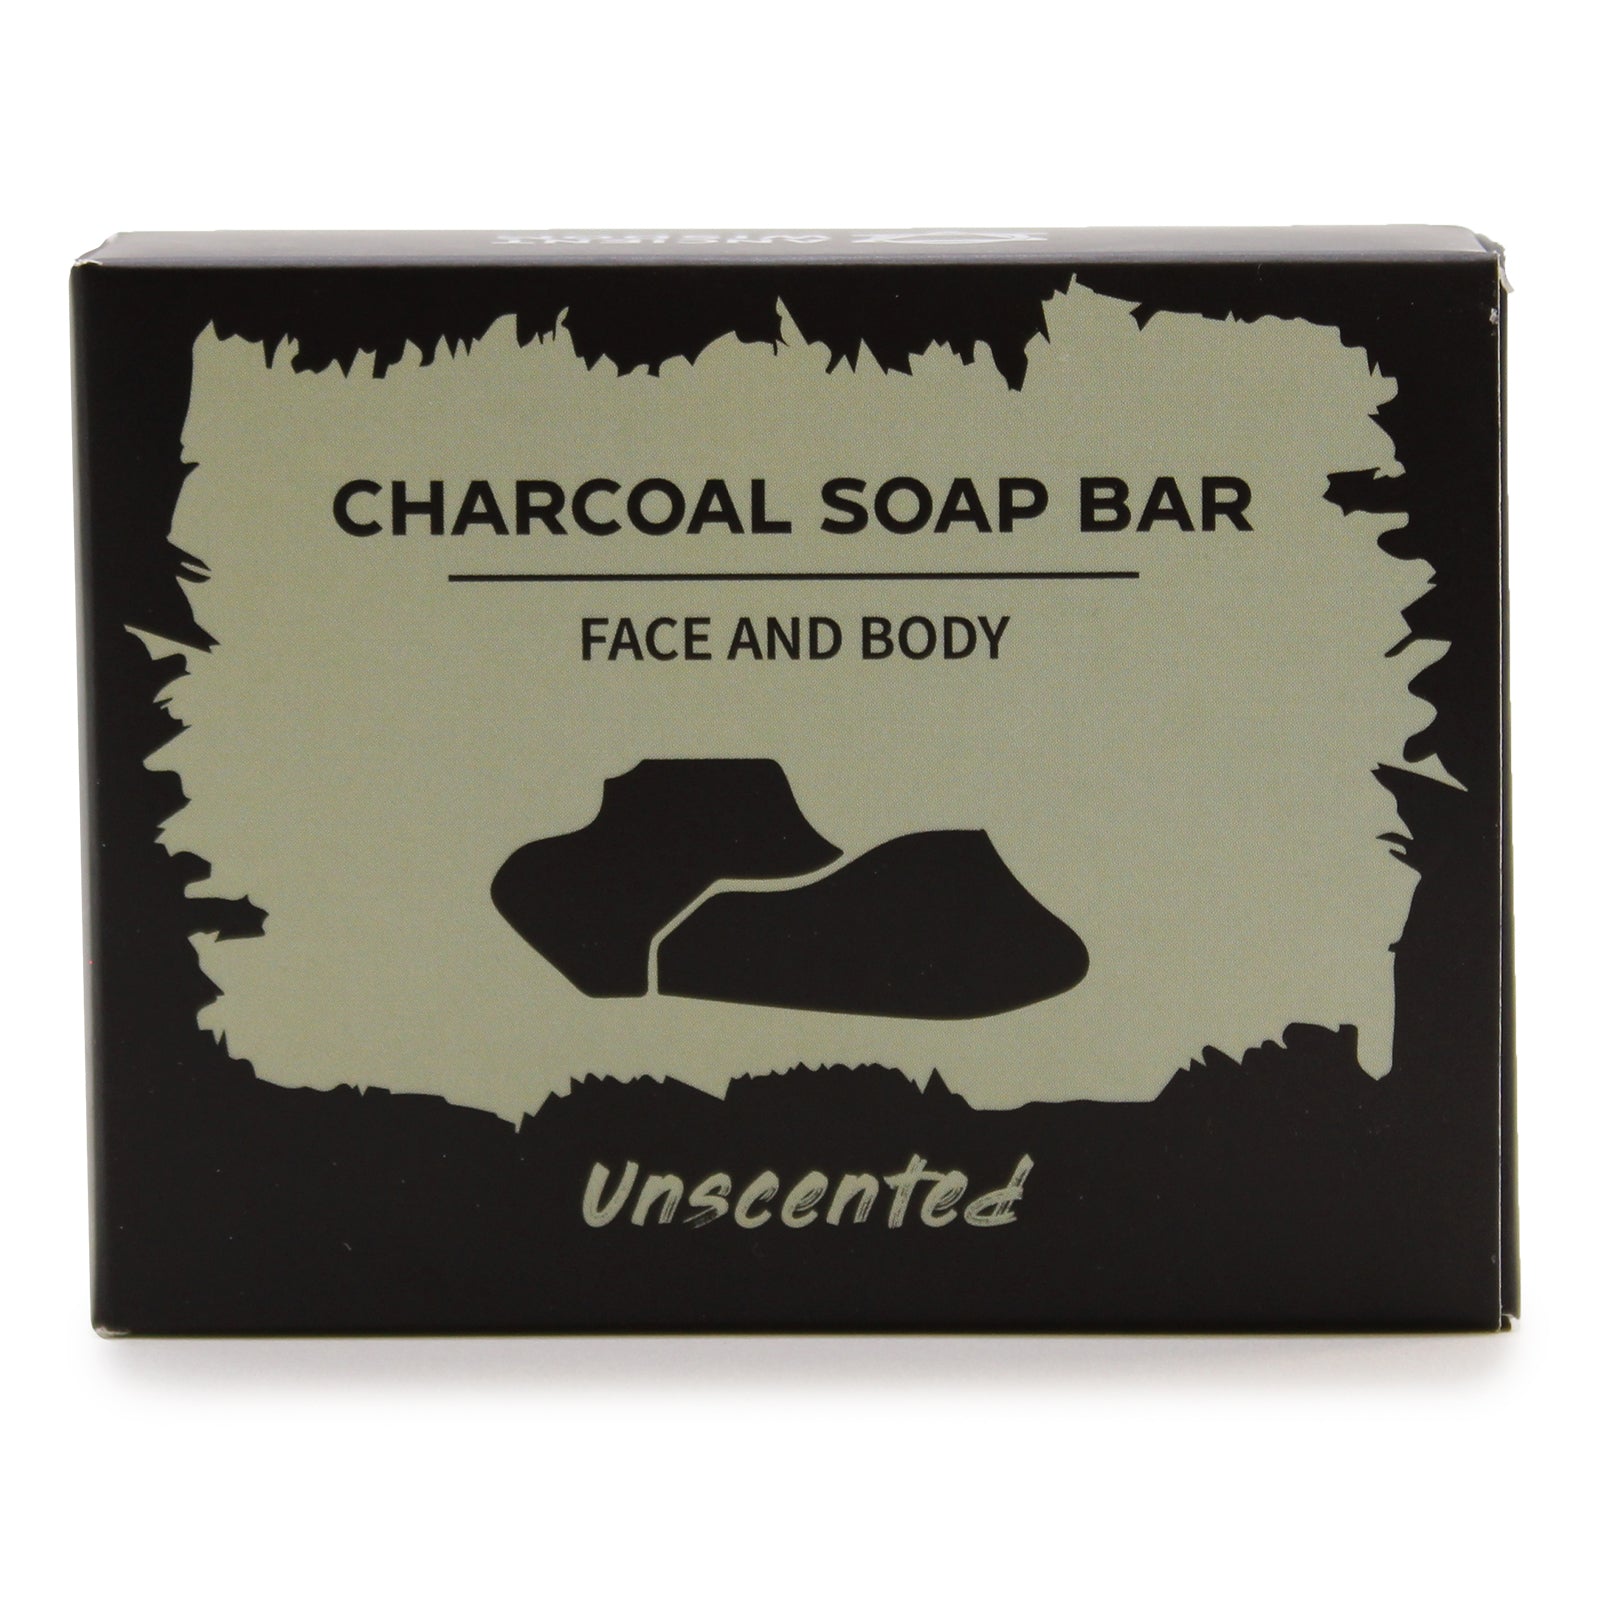 View Charcoal Soap 85g Unscented information